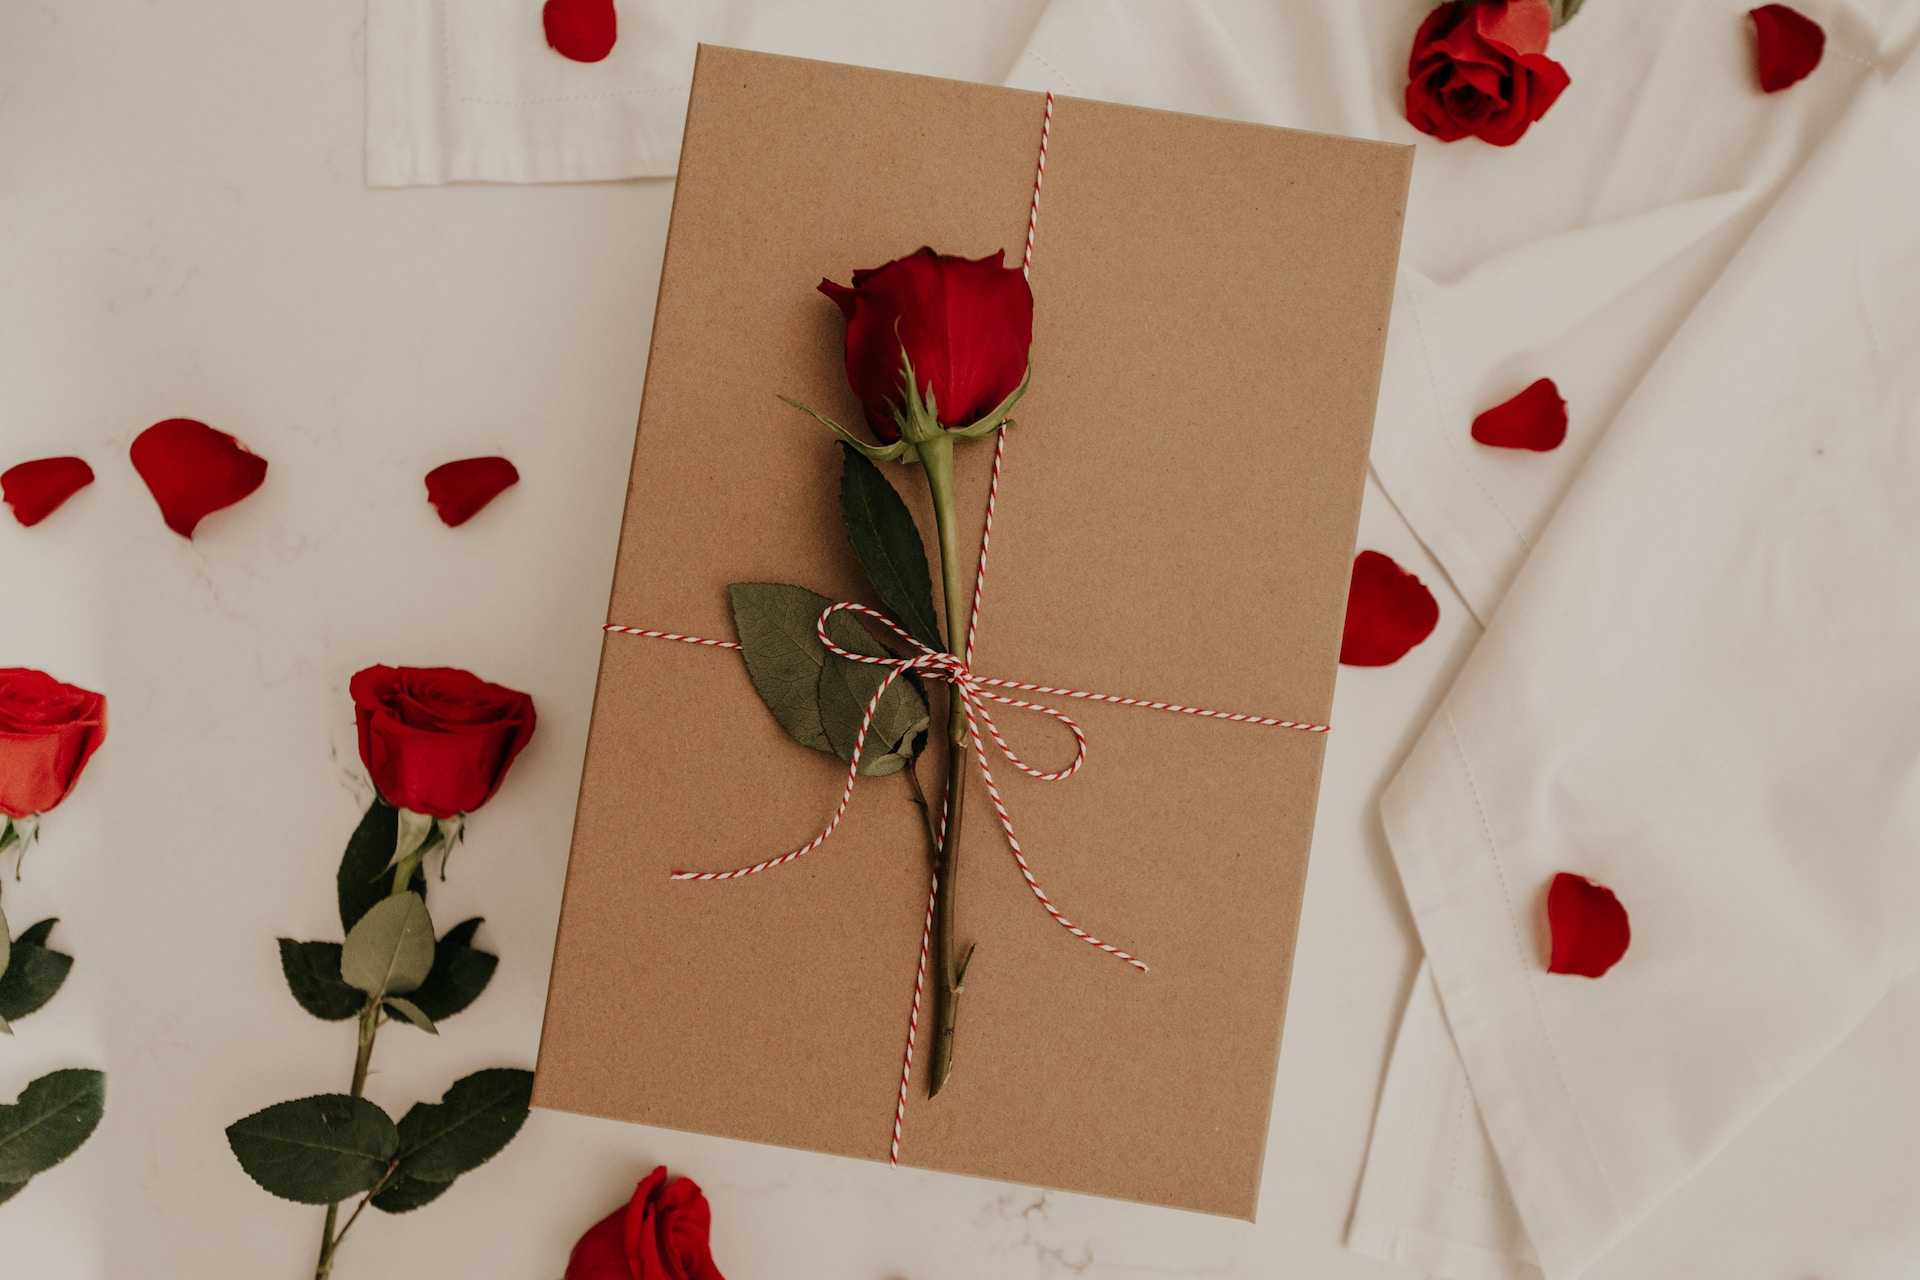 rose over an envelope with valentine's day quotes and messages for him